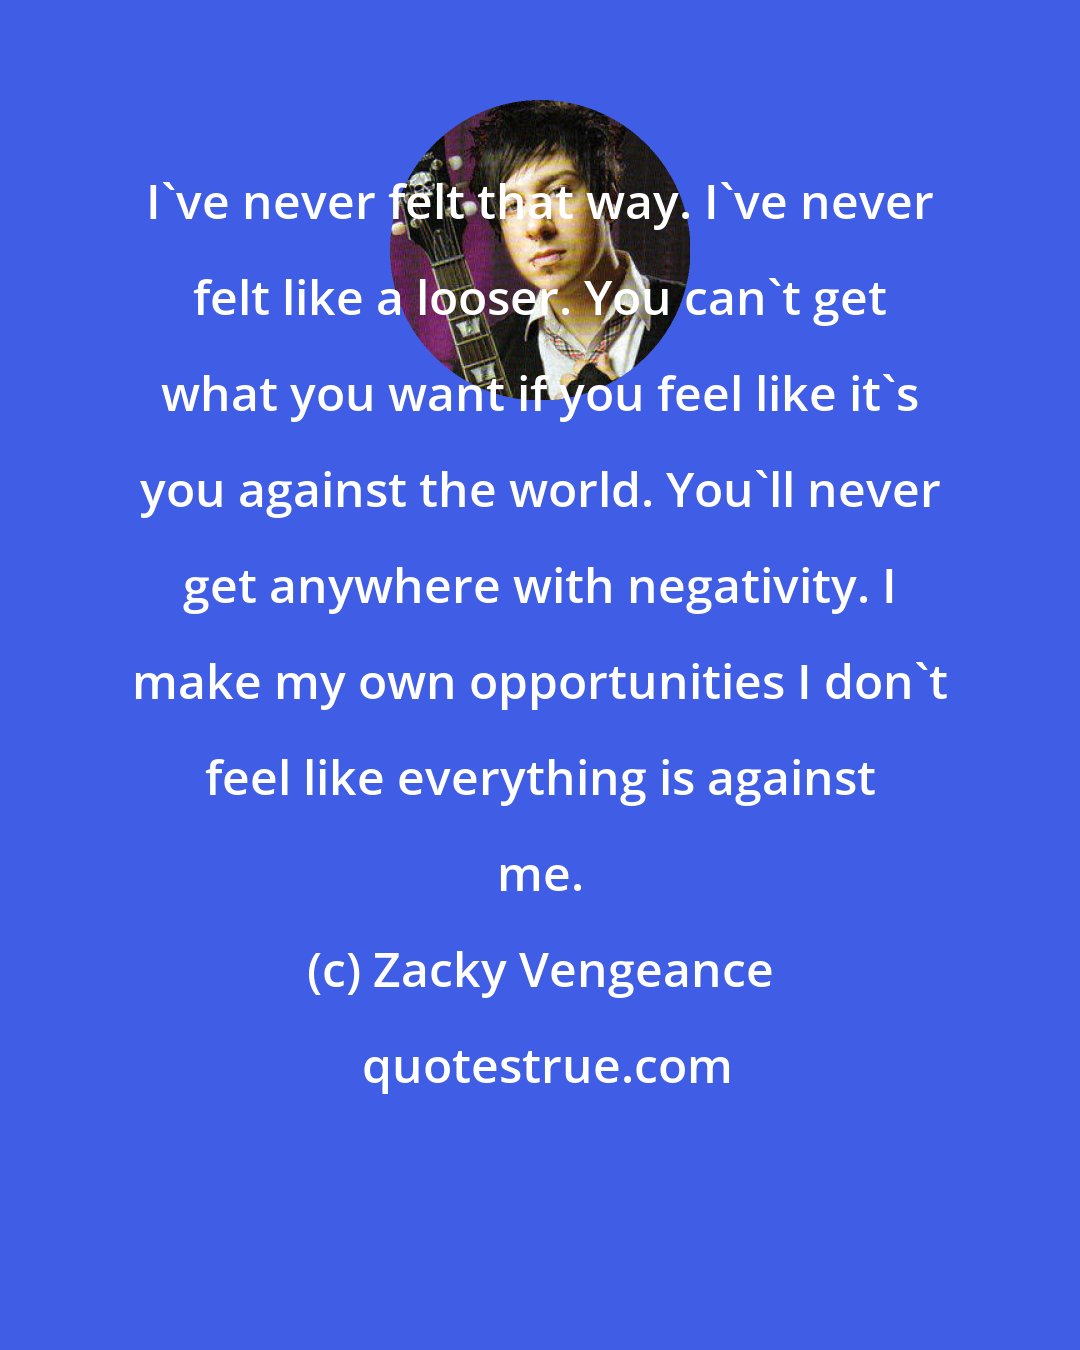 Zacky Vengeance: I've never felt that way. I've never felt like a looser. You can't get what you want if you feel like it's you against the world. You'll never get anywhere with negativity. I make my own opportunities I don't feel like everything is against me.